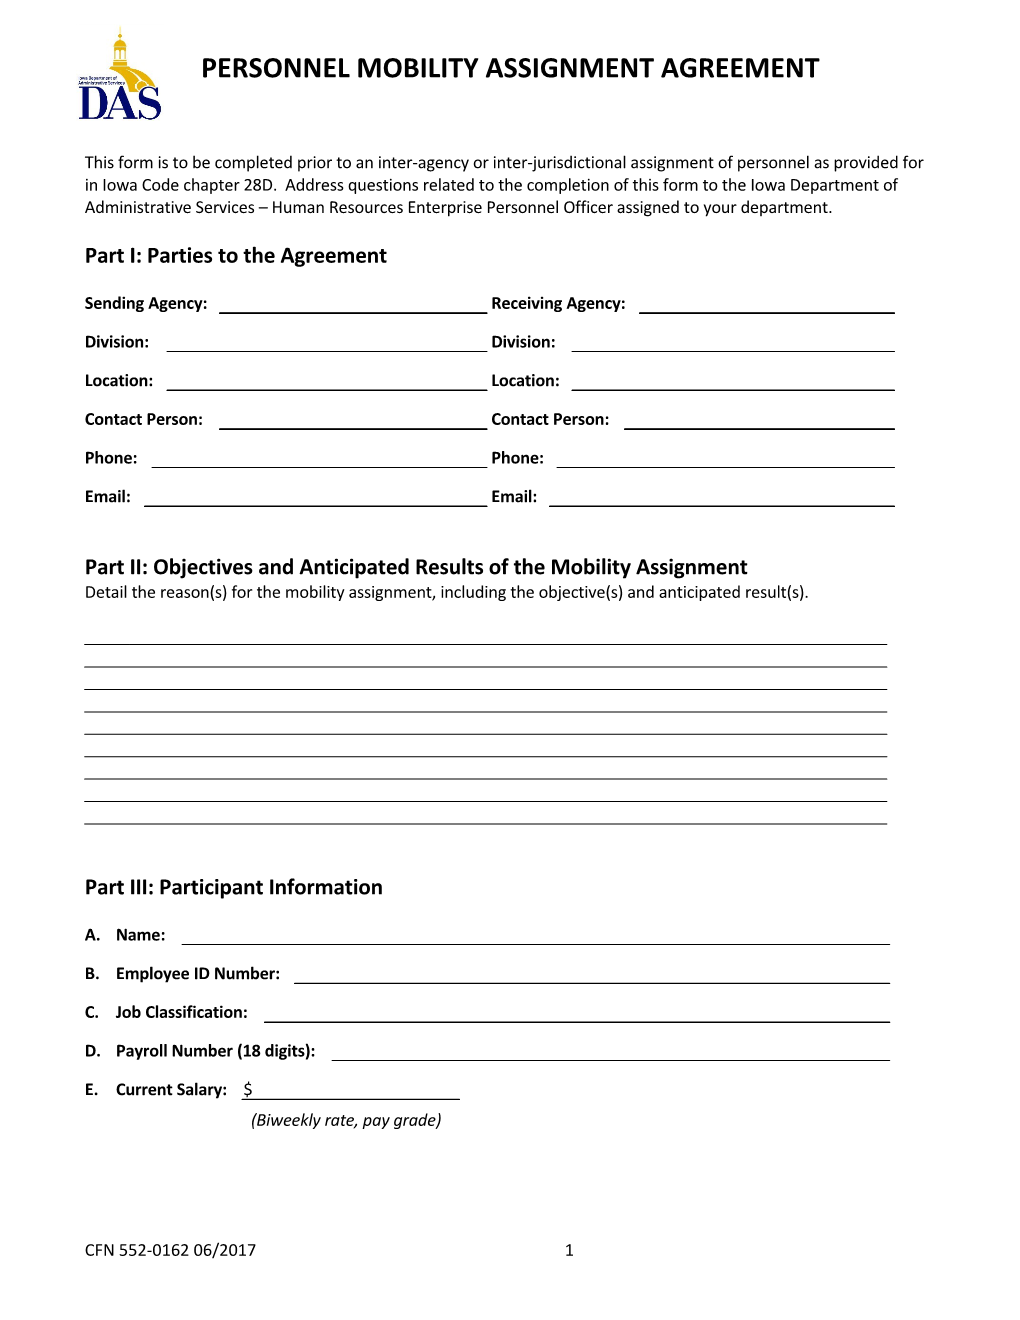 552-0162 Personnel Mobility Assignment Agreement